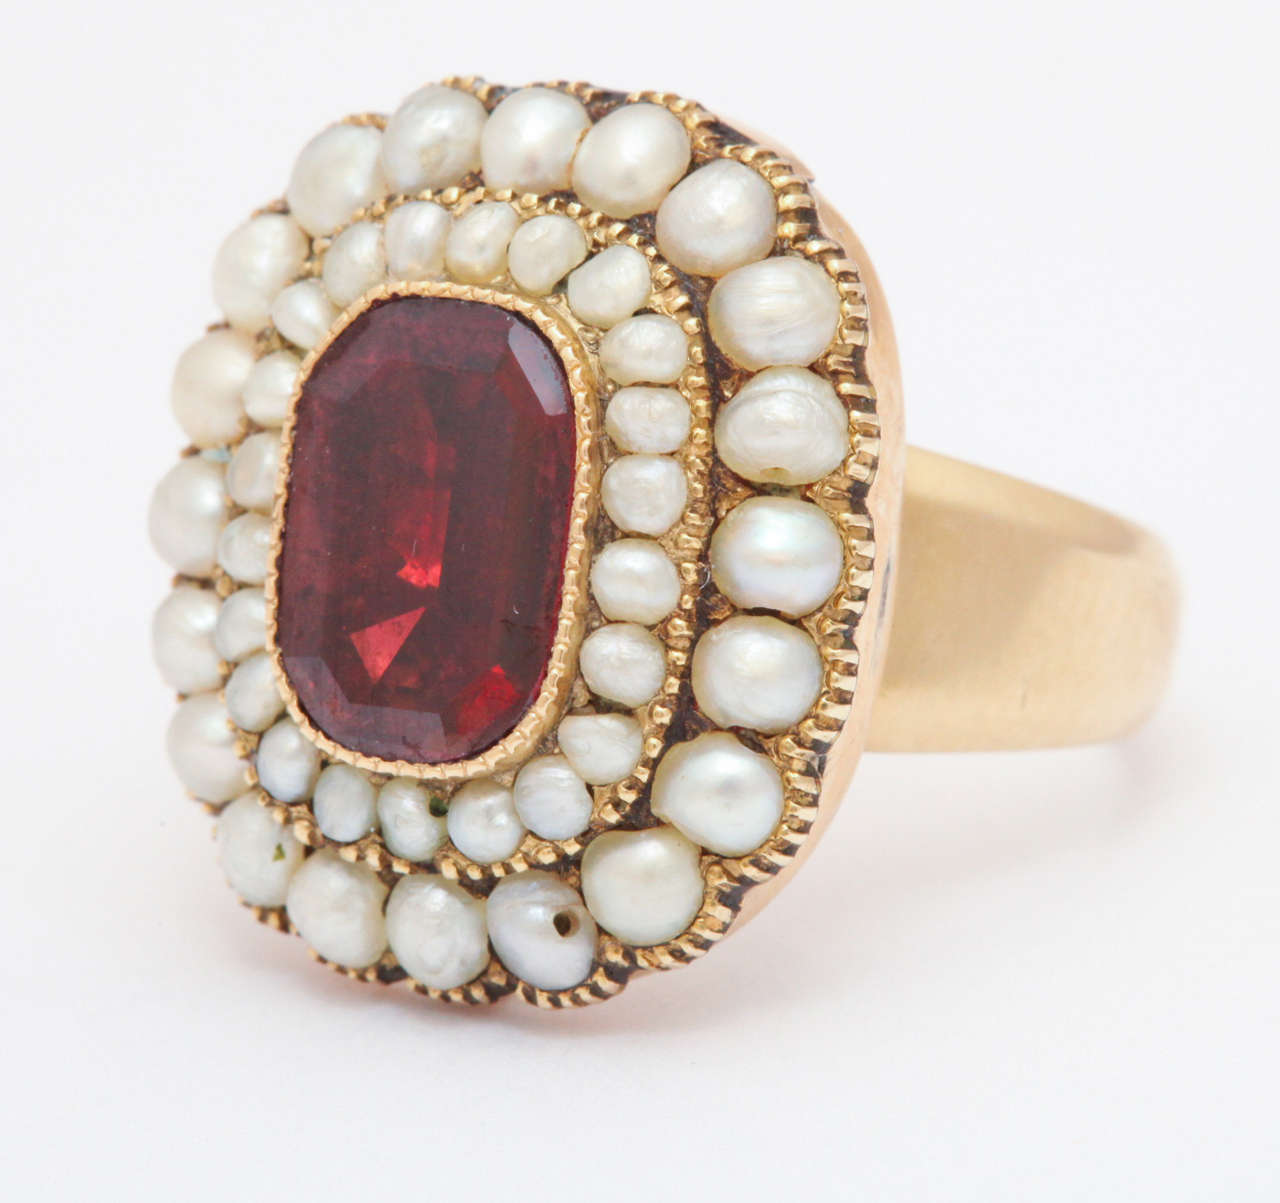 Scalloped edges frame two rows of natural pearls in a Georgian ring of 18kt gold c. 1820. The center garnet, a squared rectangle, is a luscious red set with generous prongs that give texture to the jewel. The stone is set in a closed back setting